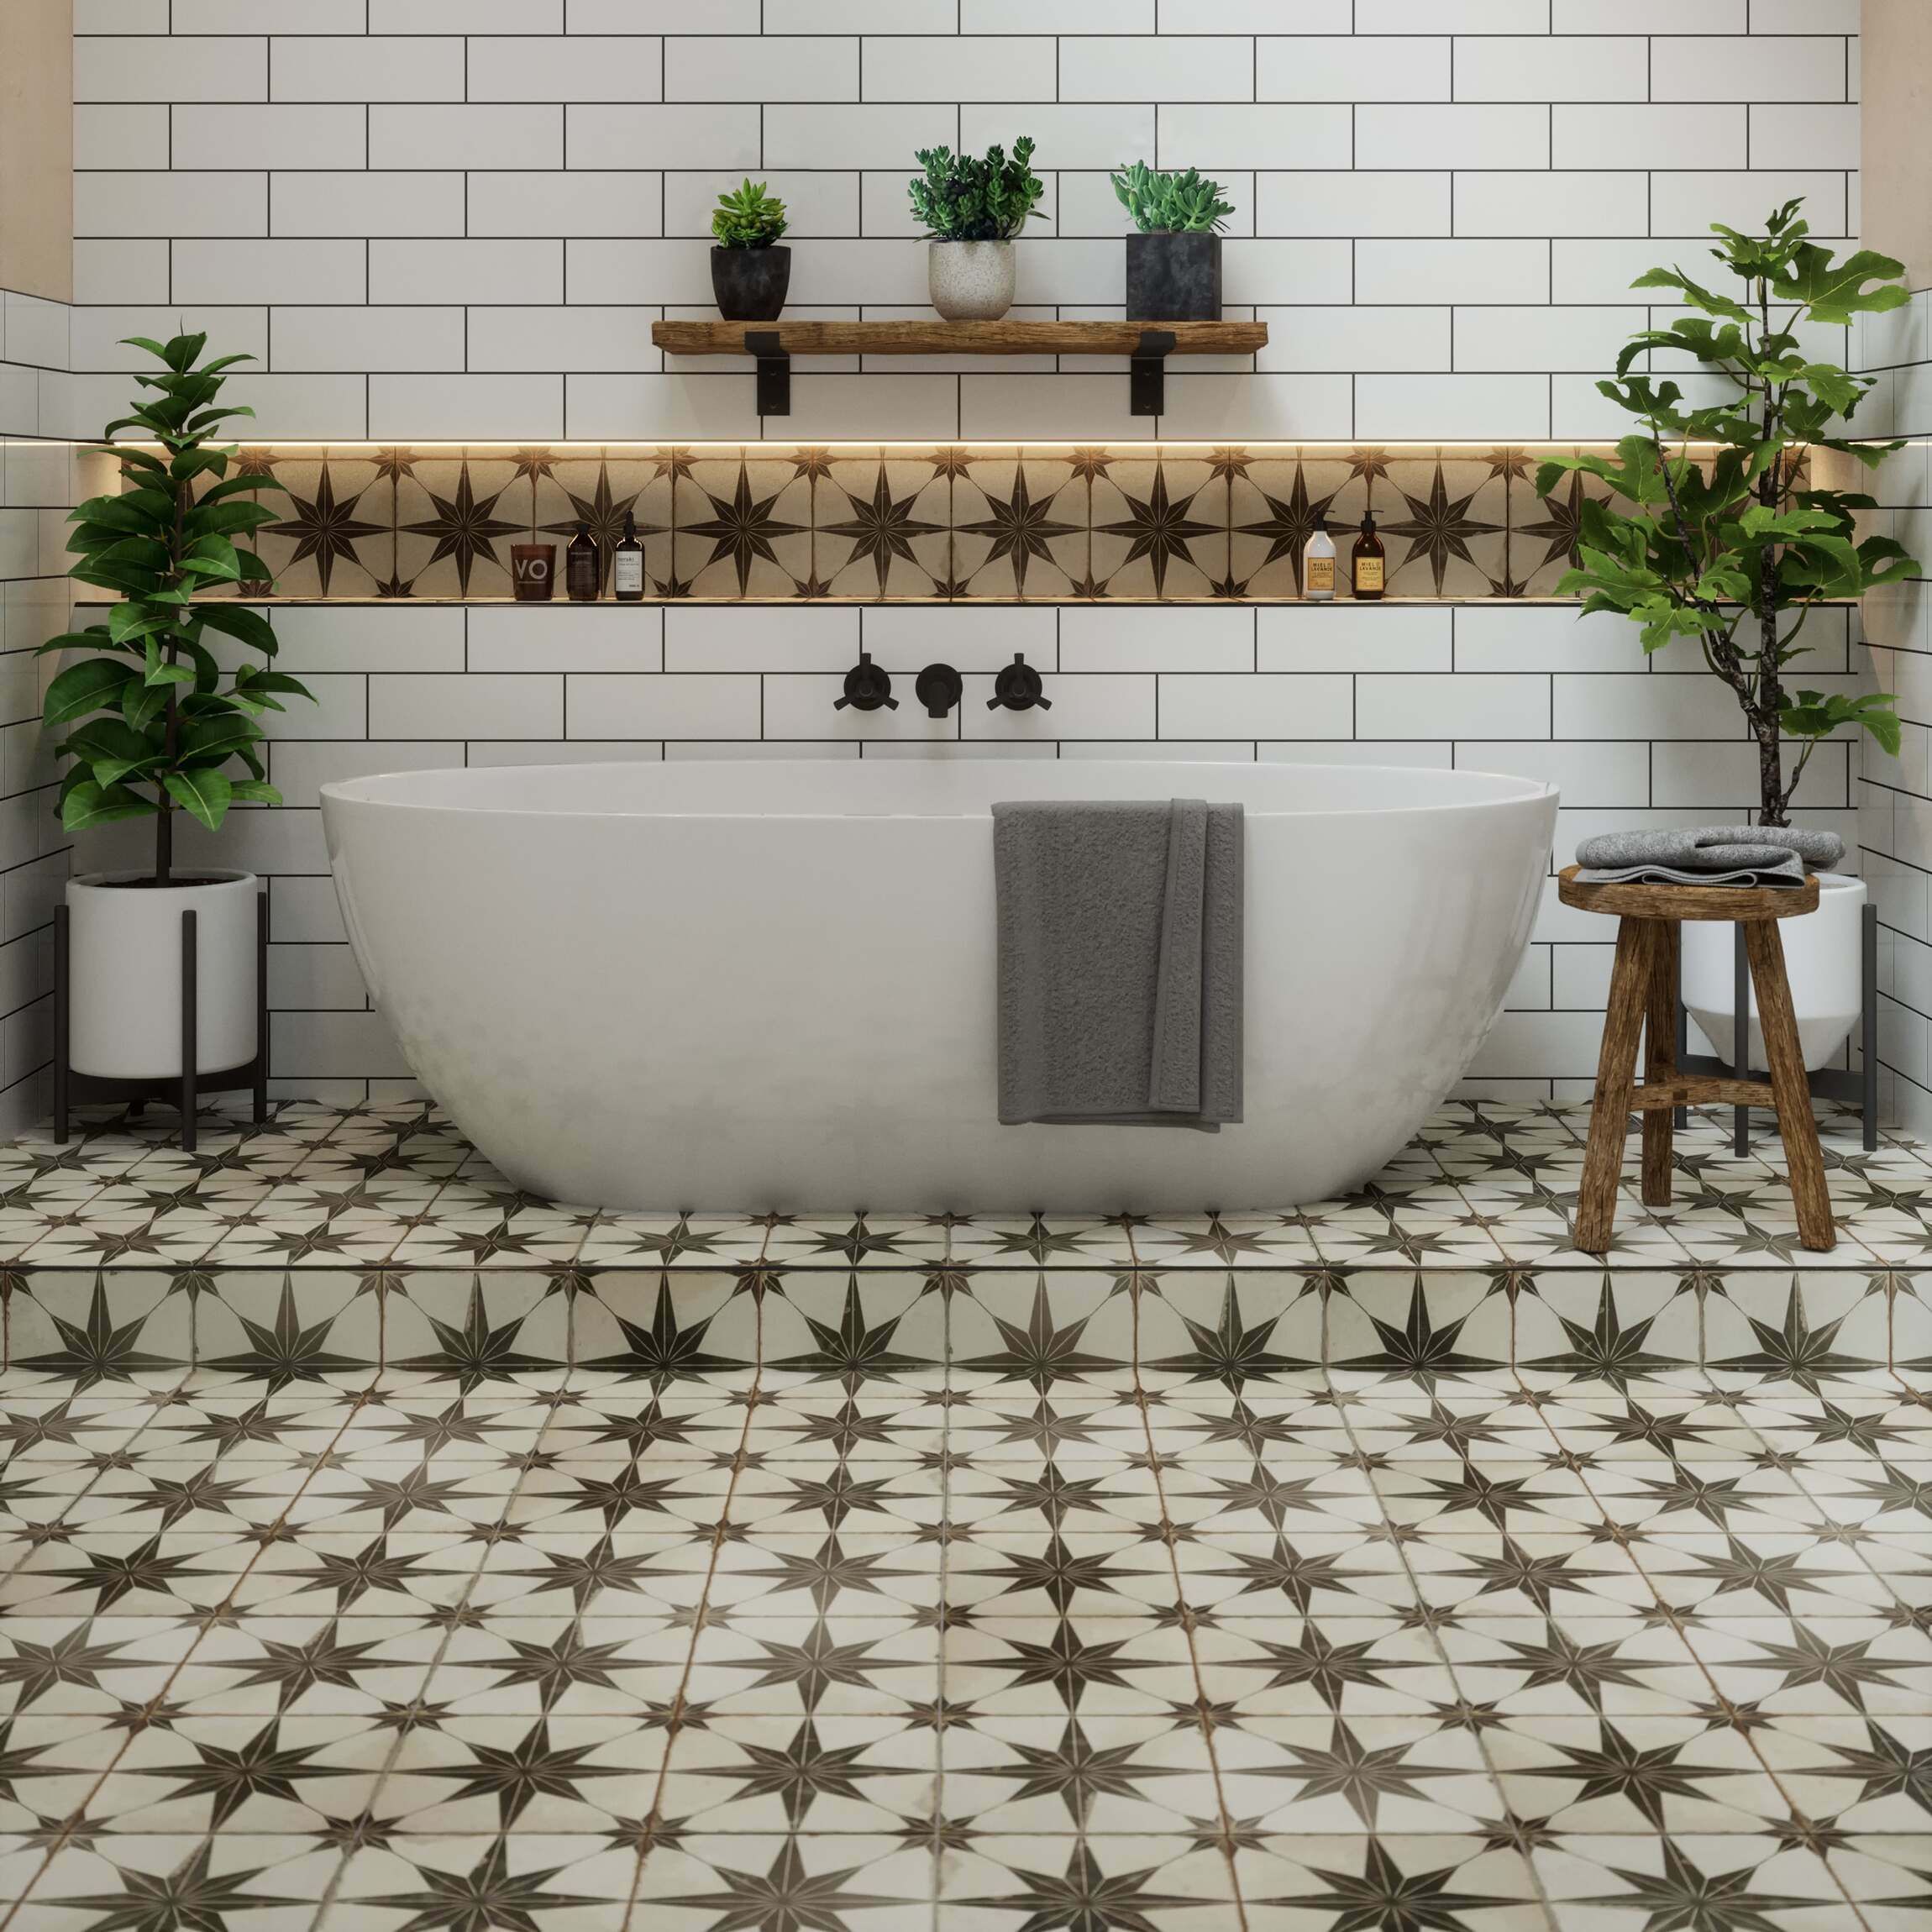 450x450 Tiles From Tile Mountain, Tiles For Bathroom Wall And Floor